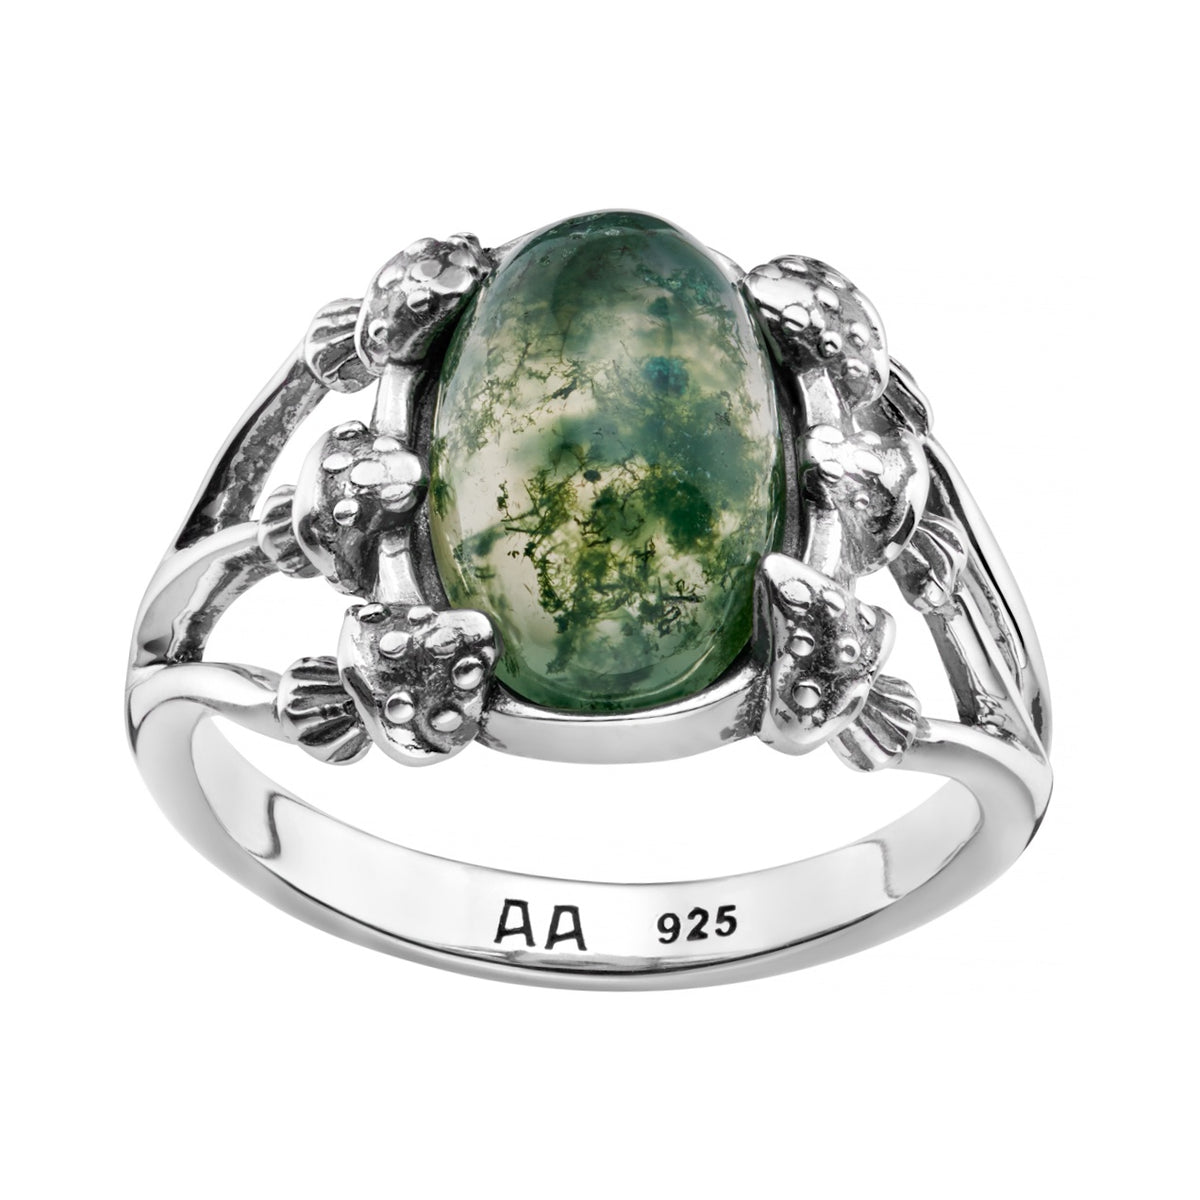 WOODLAND WHISPER - Moss Agate & Sterling Silver Ring